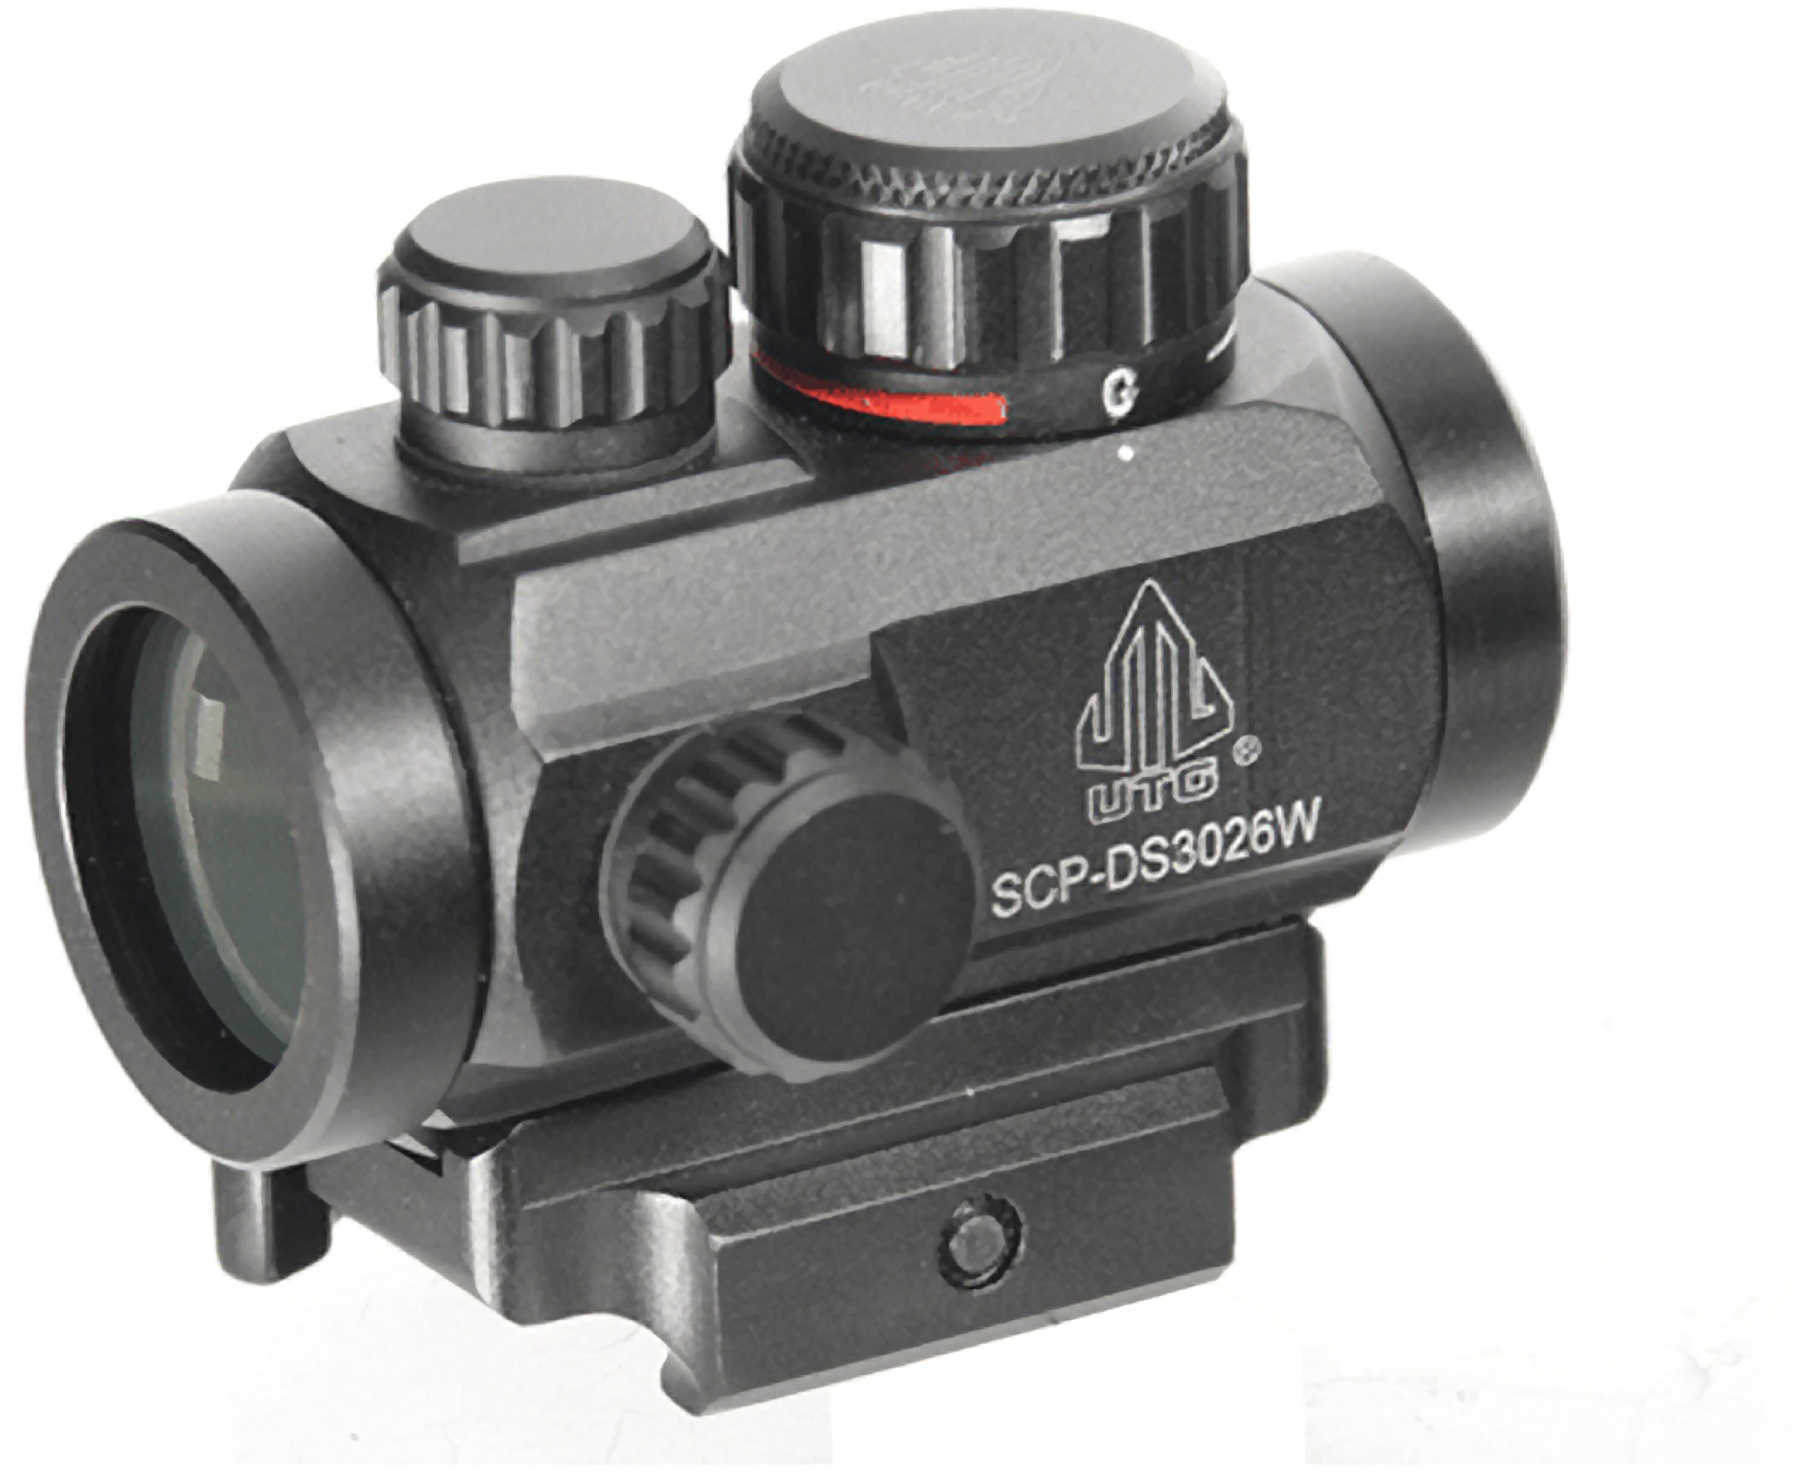 Leapers Inc. - UTG Instant Target Aiming Sight 2.6" 30mm Fits Picatinny Black Finish Red/Green CQB Micro Dot w/Integral